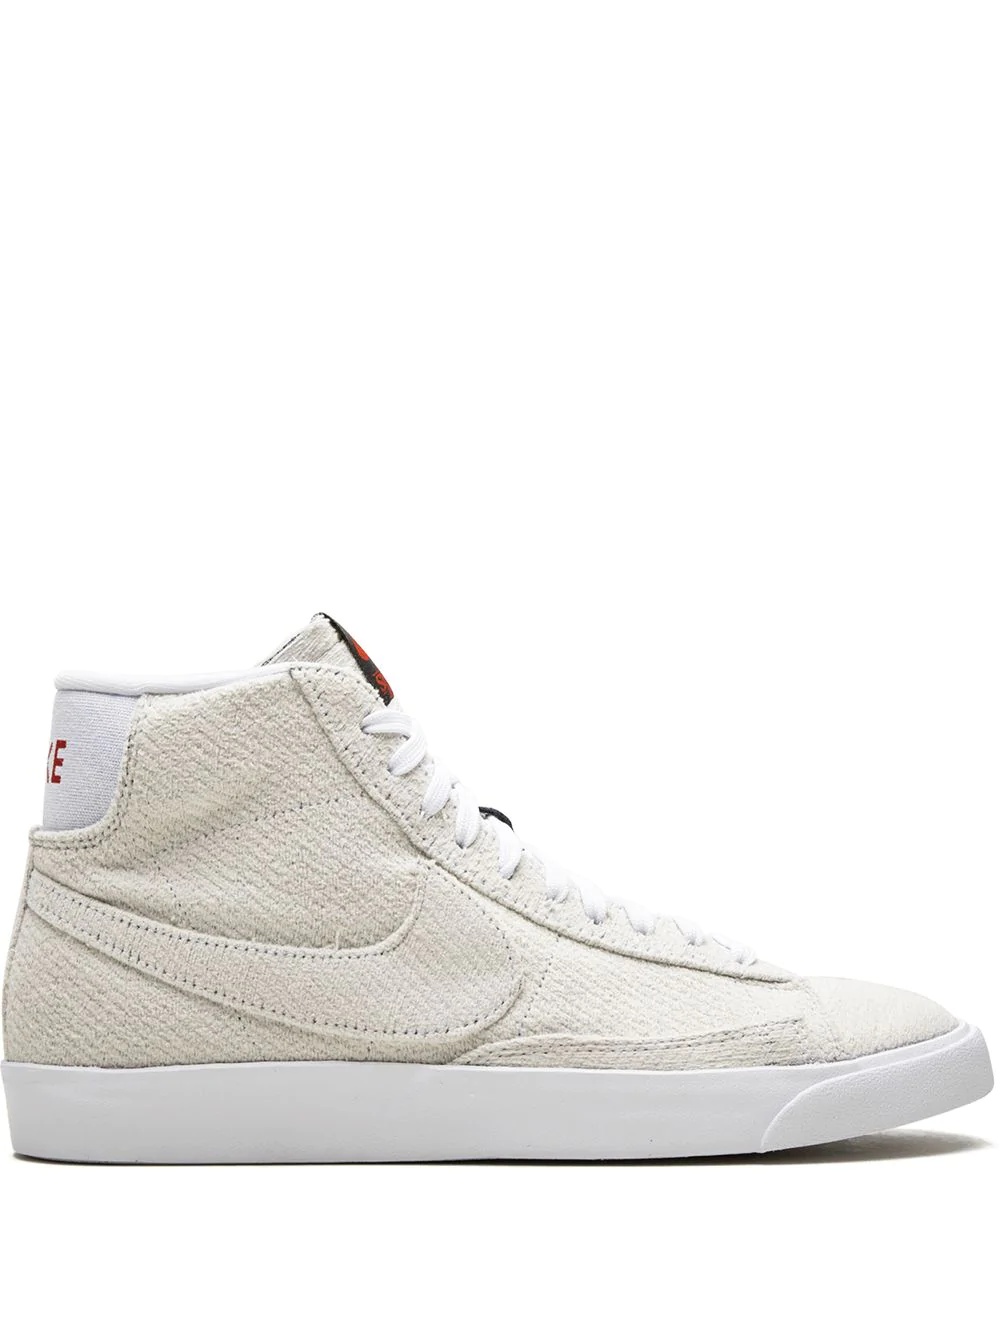 x The Stranger Things Blazer Mid QS UD sneakers - 1